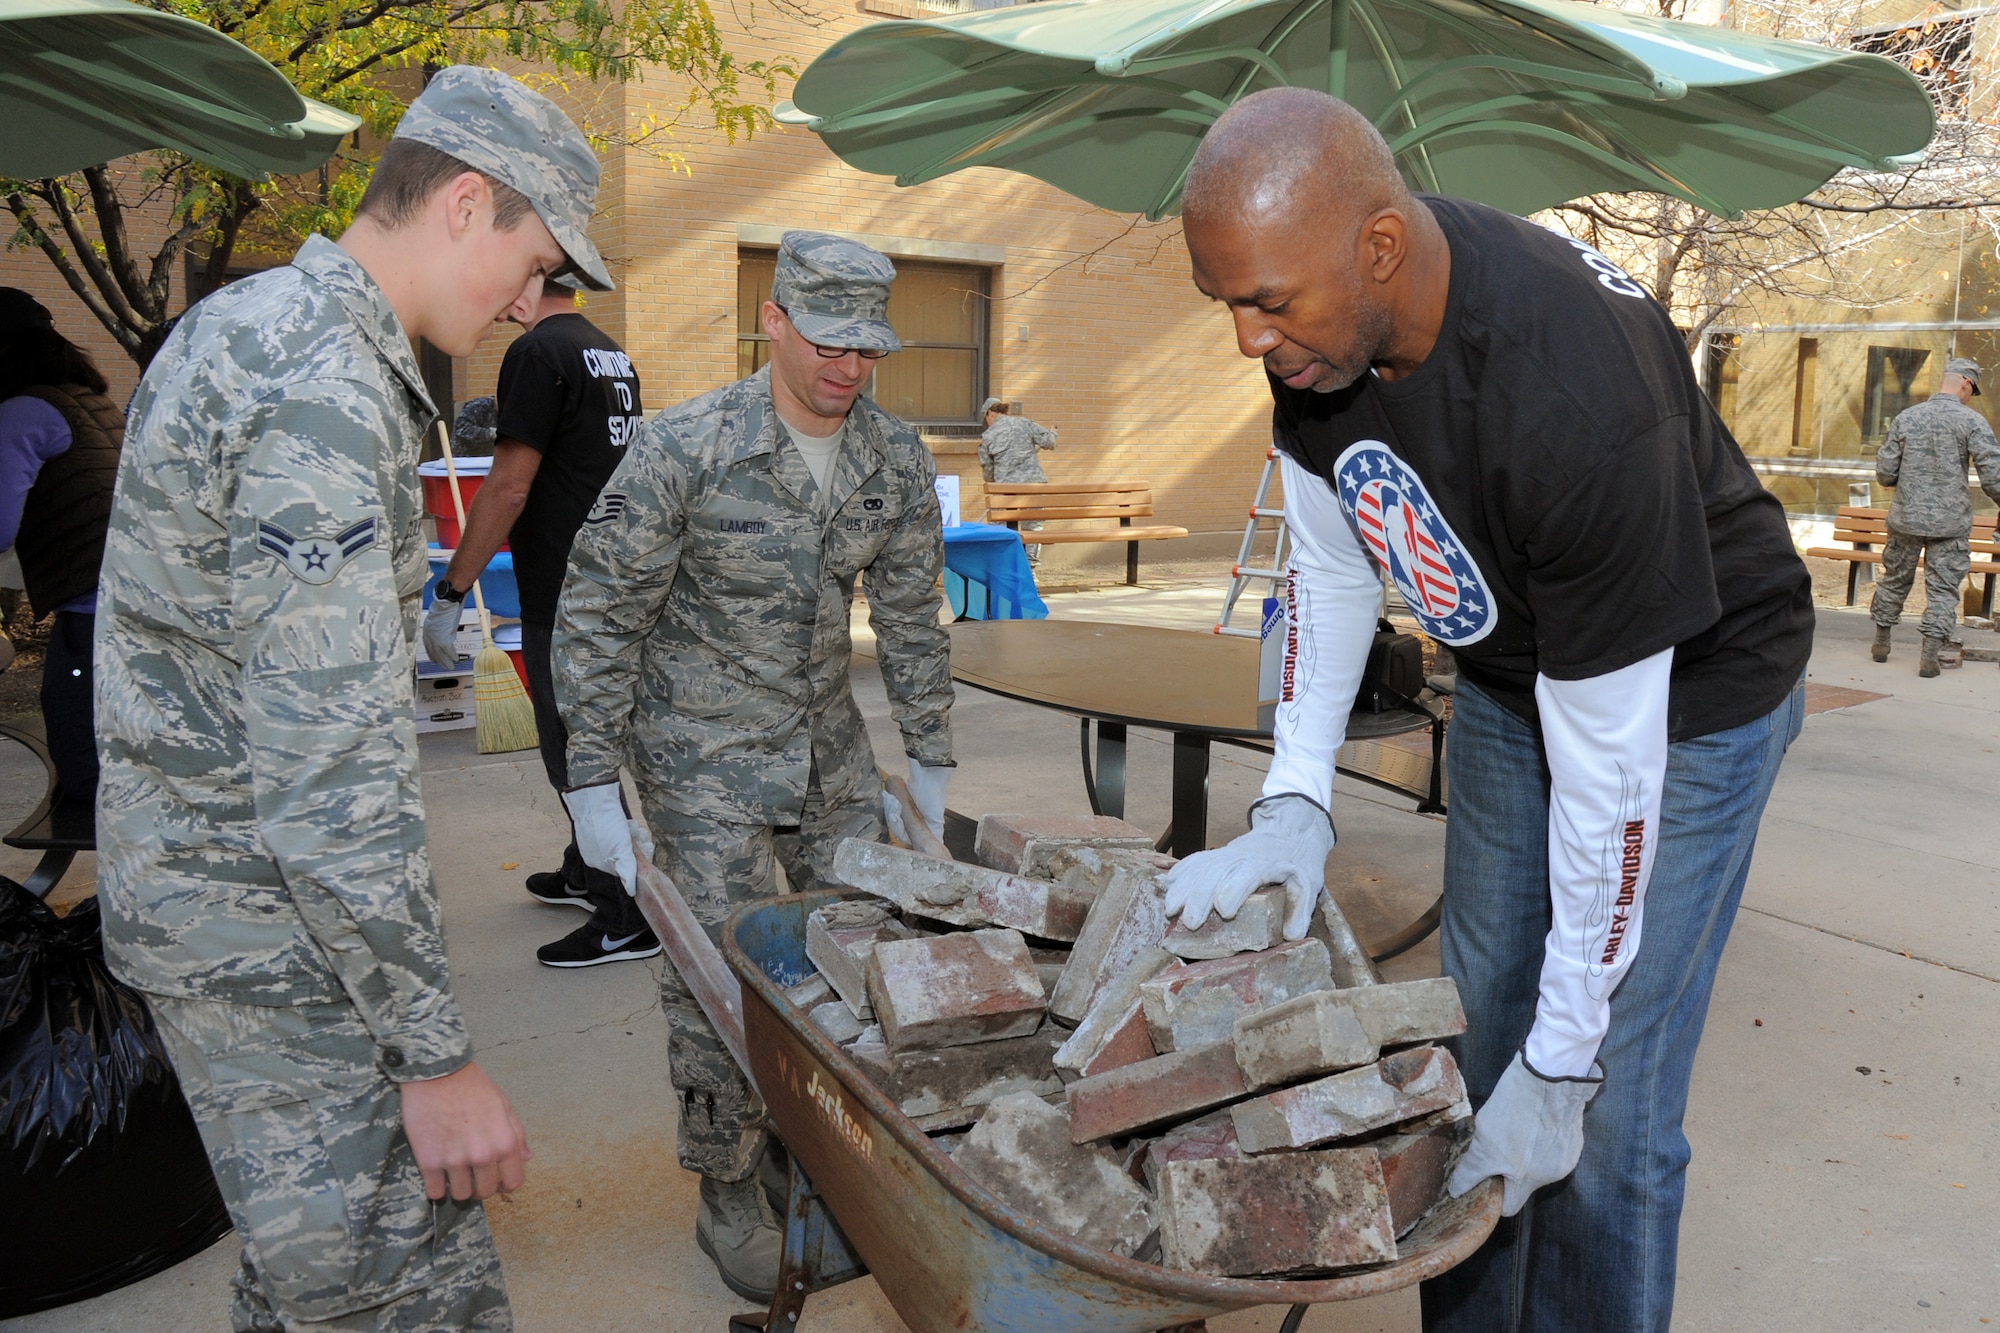 Airman 1st Class Shane Coopmans (left), Staff Sgt. Albert Lamboy and Thurl Bailey, a former NBA player with the Utah Jazz, dispose of old bricks during a community service project Nov. 6, 2014, at the George E. Whalen Veterans Affairs Medical Center in Salt Lake City, Utah. Coopmans is with the 75th Operations Support Squadron and Lamboy serves with the 75th Logistics Readiness Squadron. (Air Force photo/Todd Cromar)